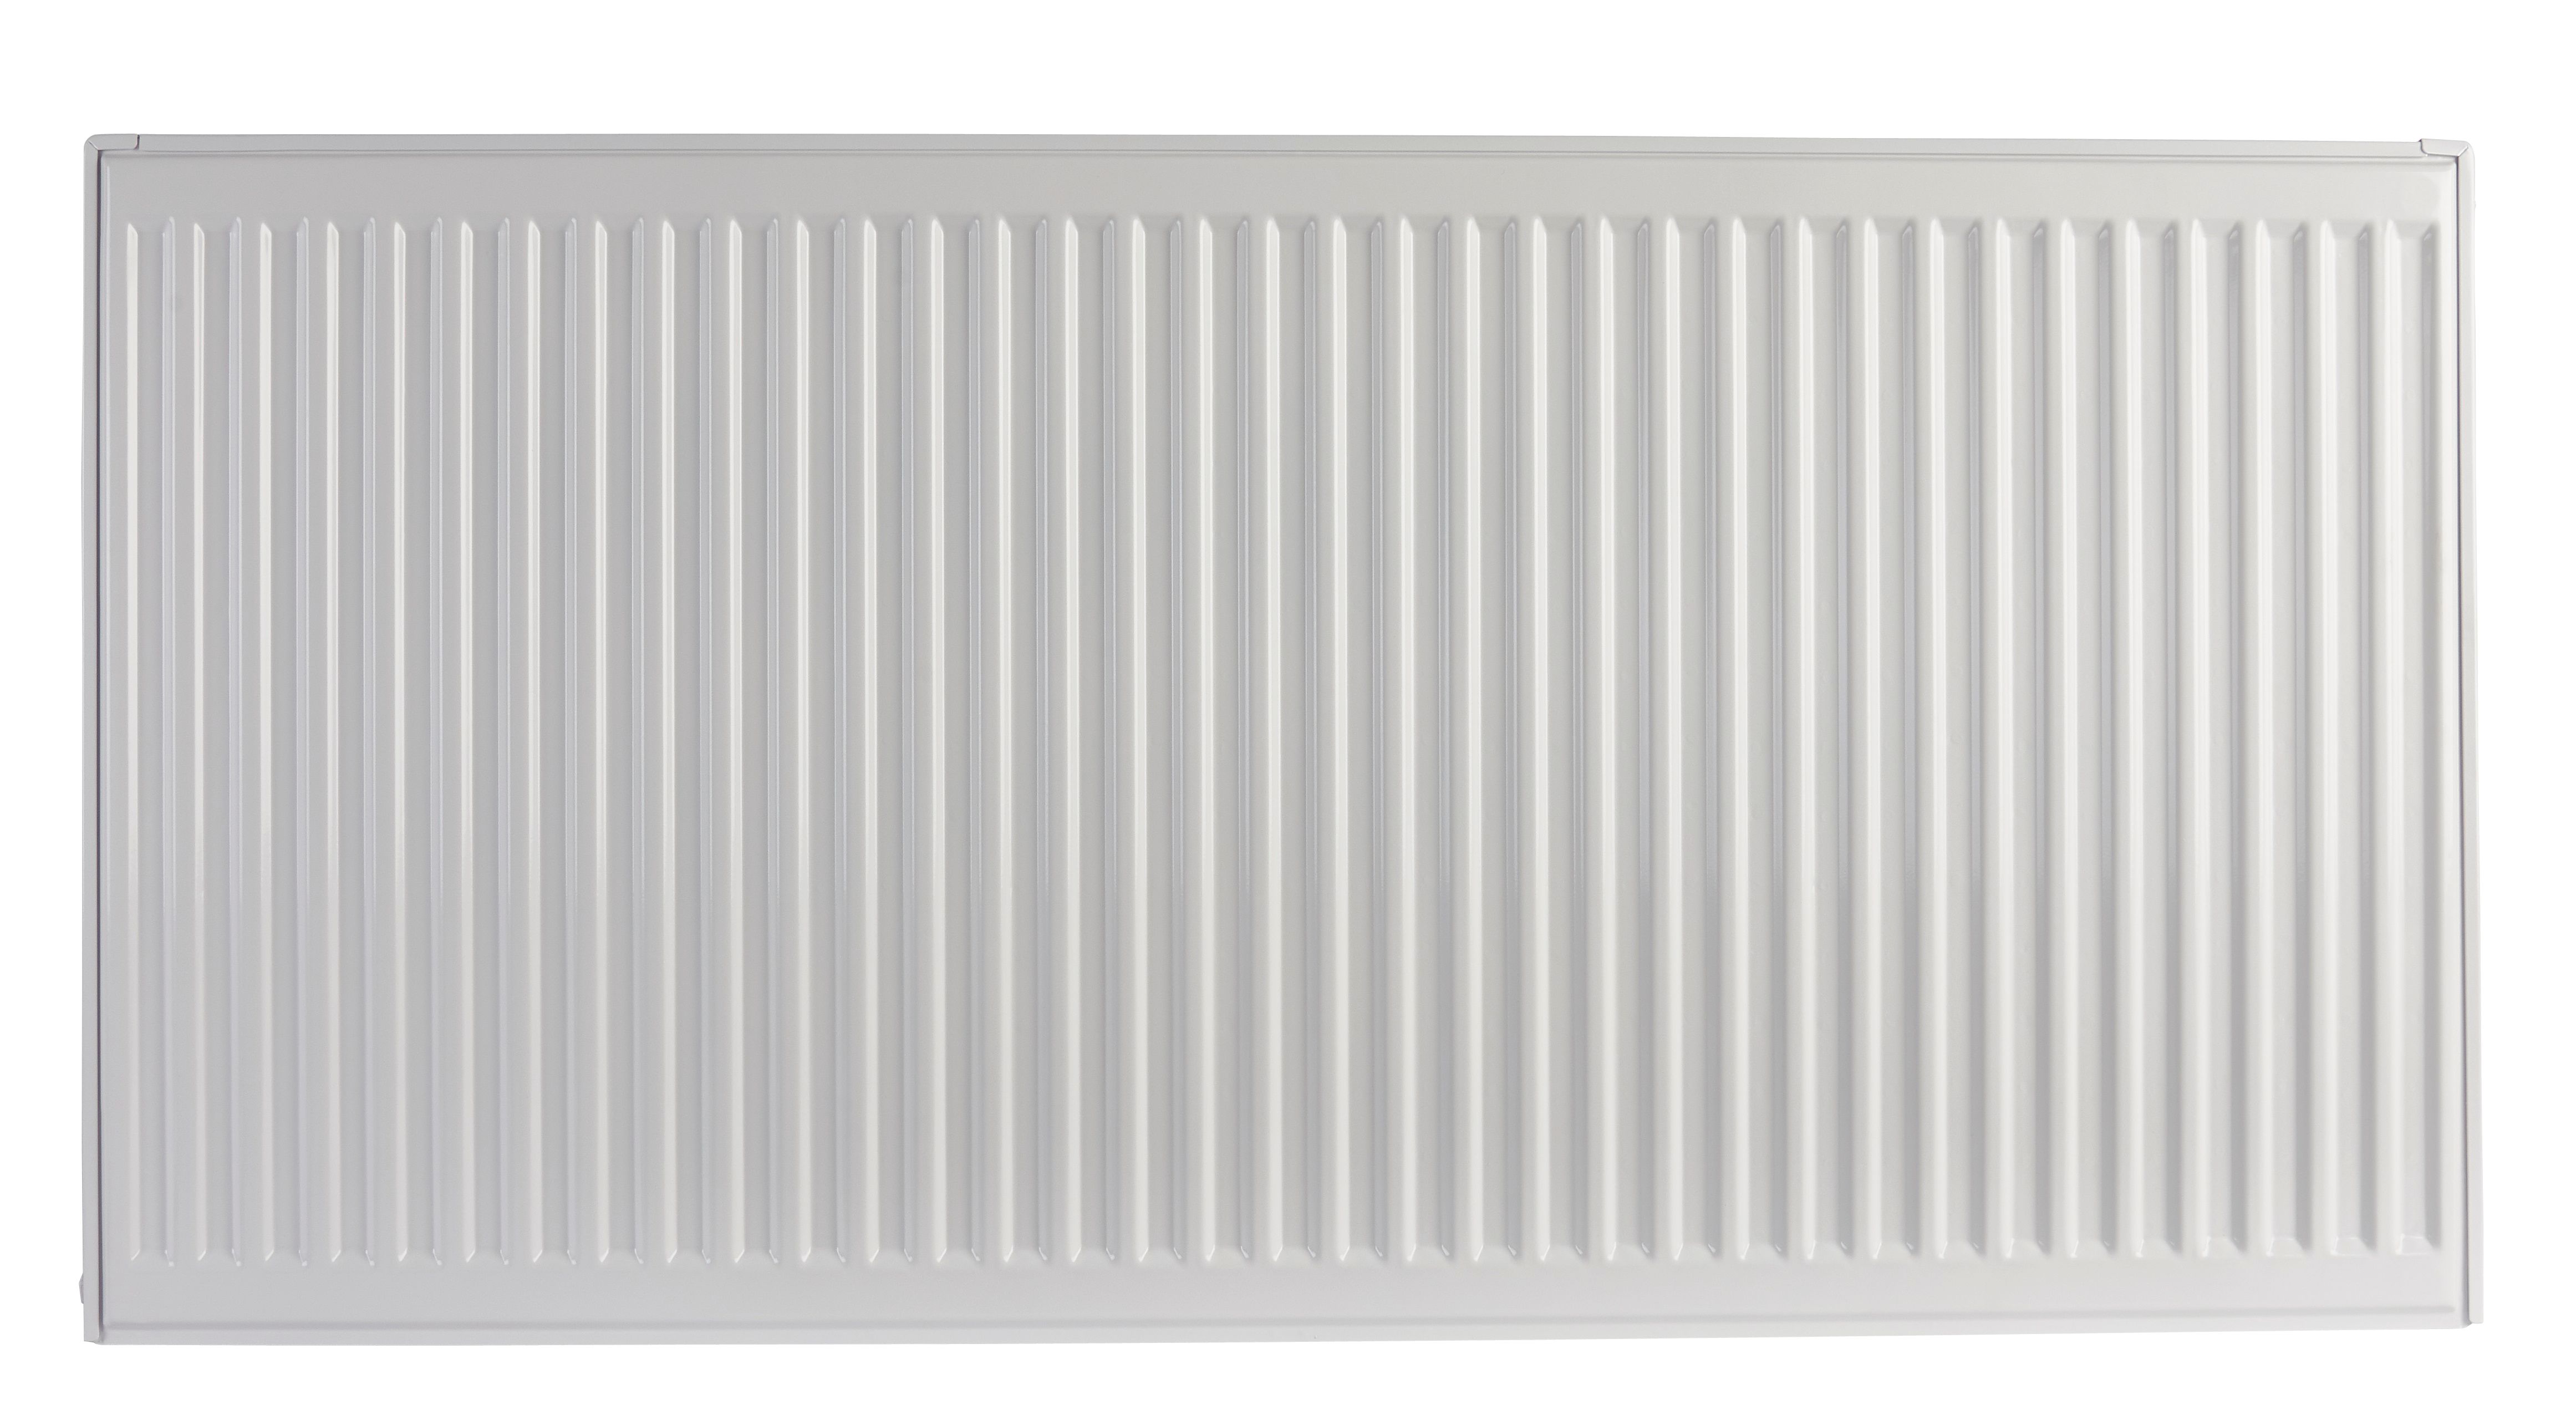 Image of Homeline by Stelrad 500 x 1600mm Type 11 Single Panel Single Convector Radiator